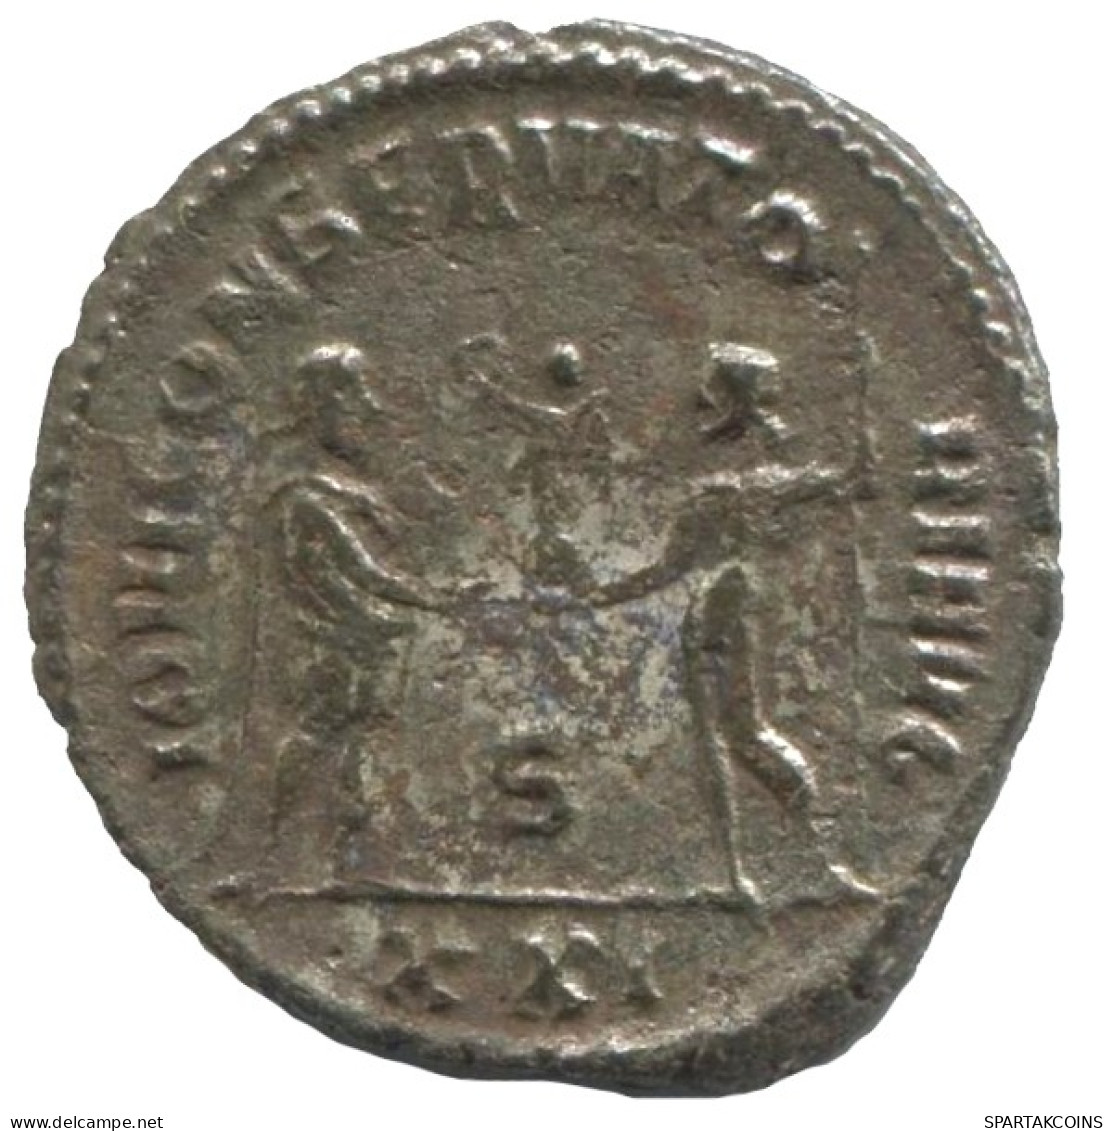 DIOCLETIAN ANTONINIANUS Antioch (S/XXI) AD287 IOVICONSERVATORIAVG #ANT1863.48.E.A - The Tetrarchy (284 AD To 307 AD)